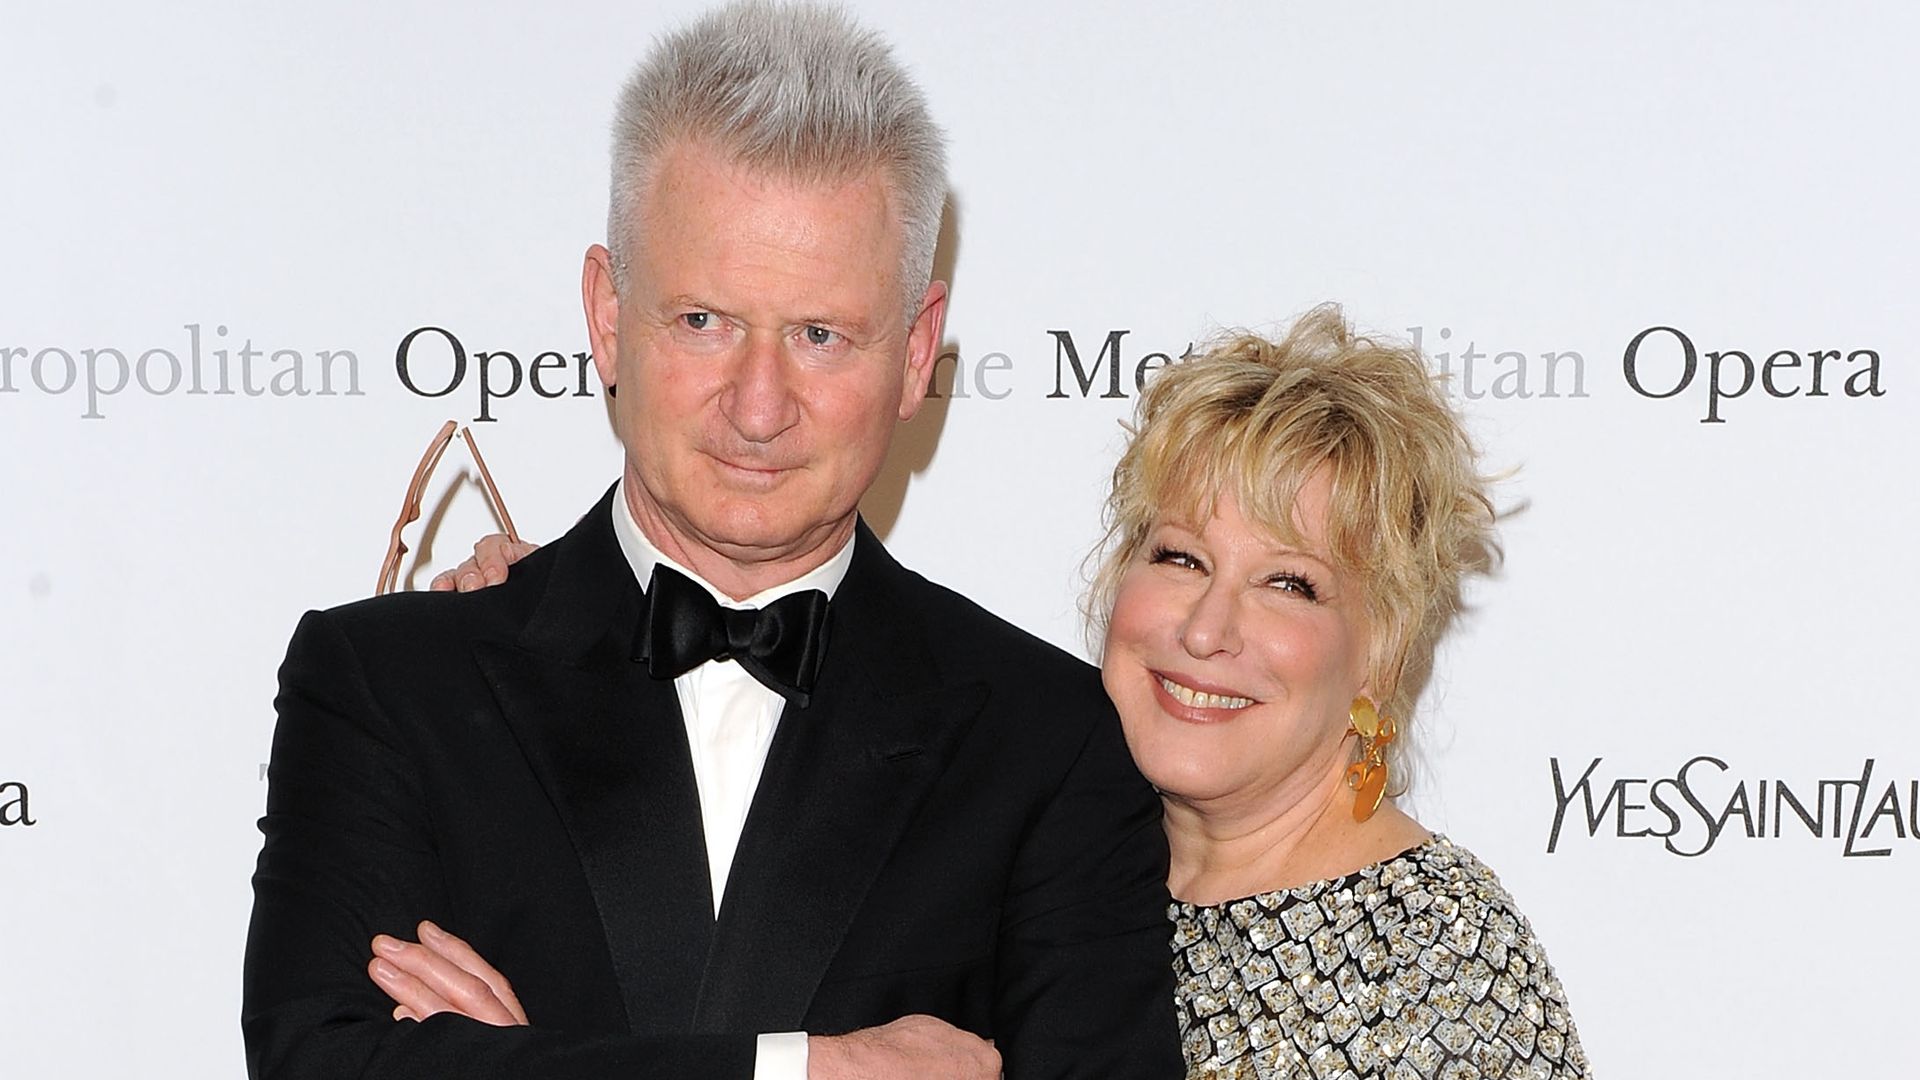 Bette Midler reveals unusual sleeping arrangement with husband is key to 40-year marriage